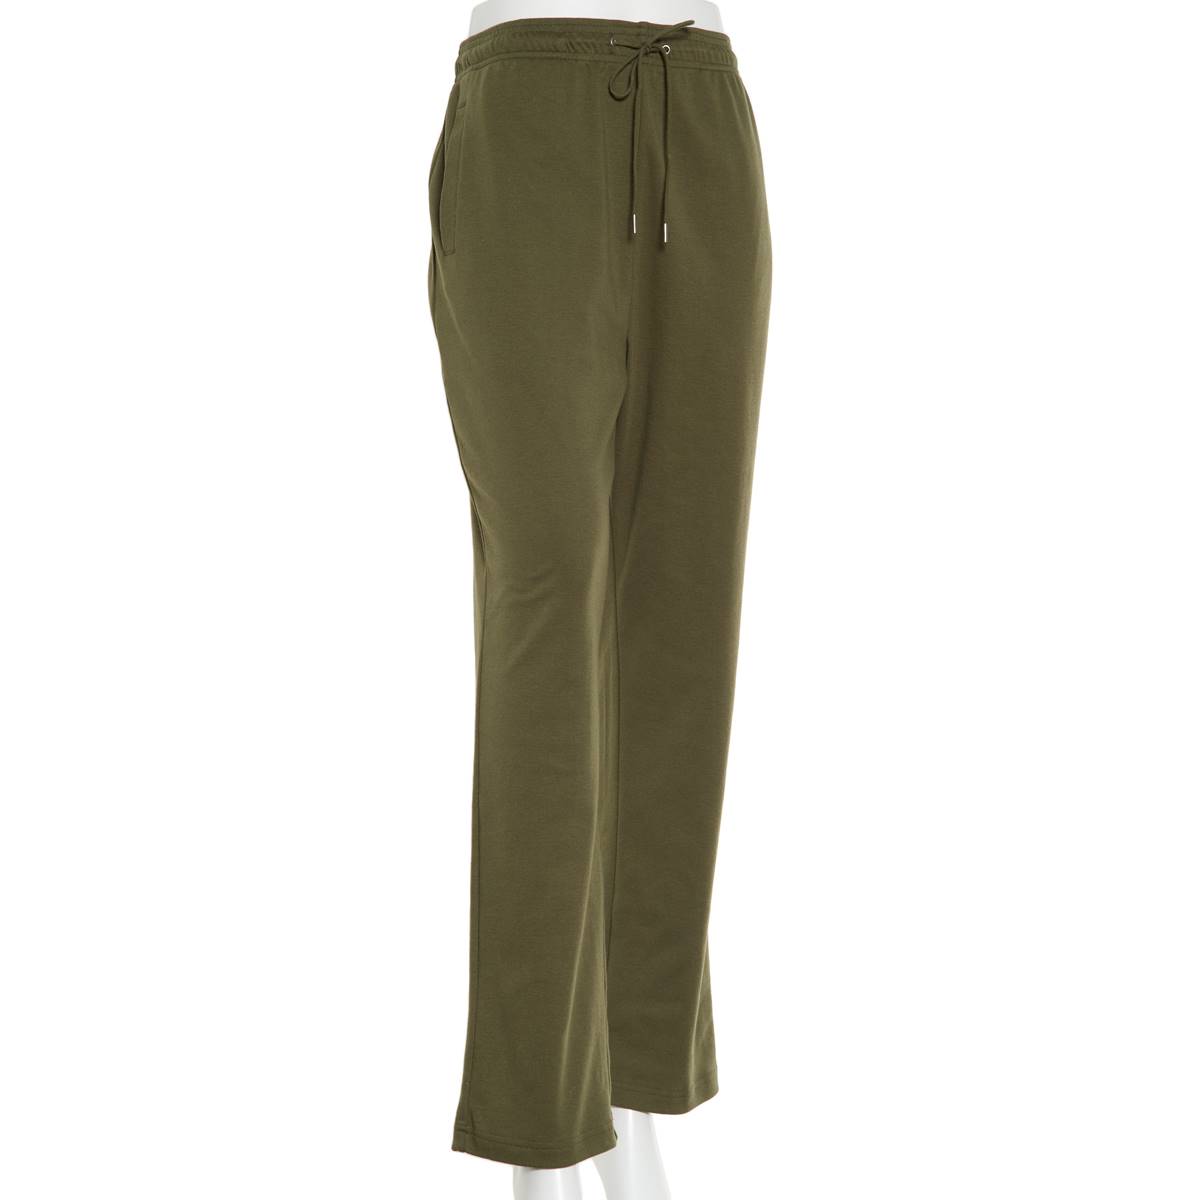 Womens Hasting & Smith Knit Pants - Average